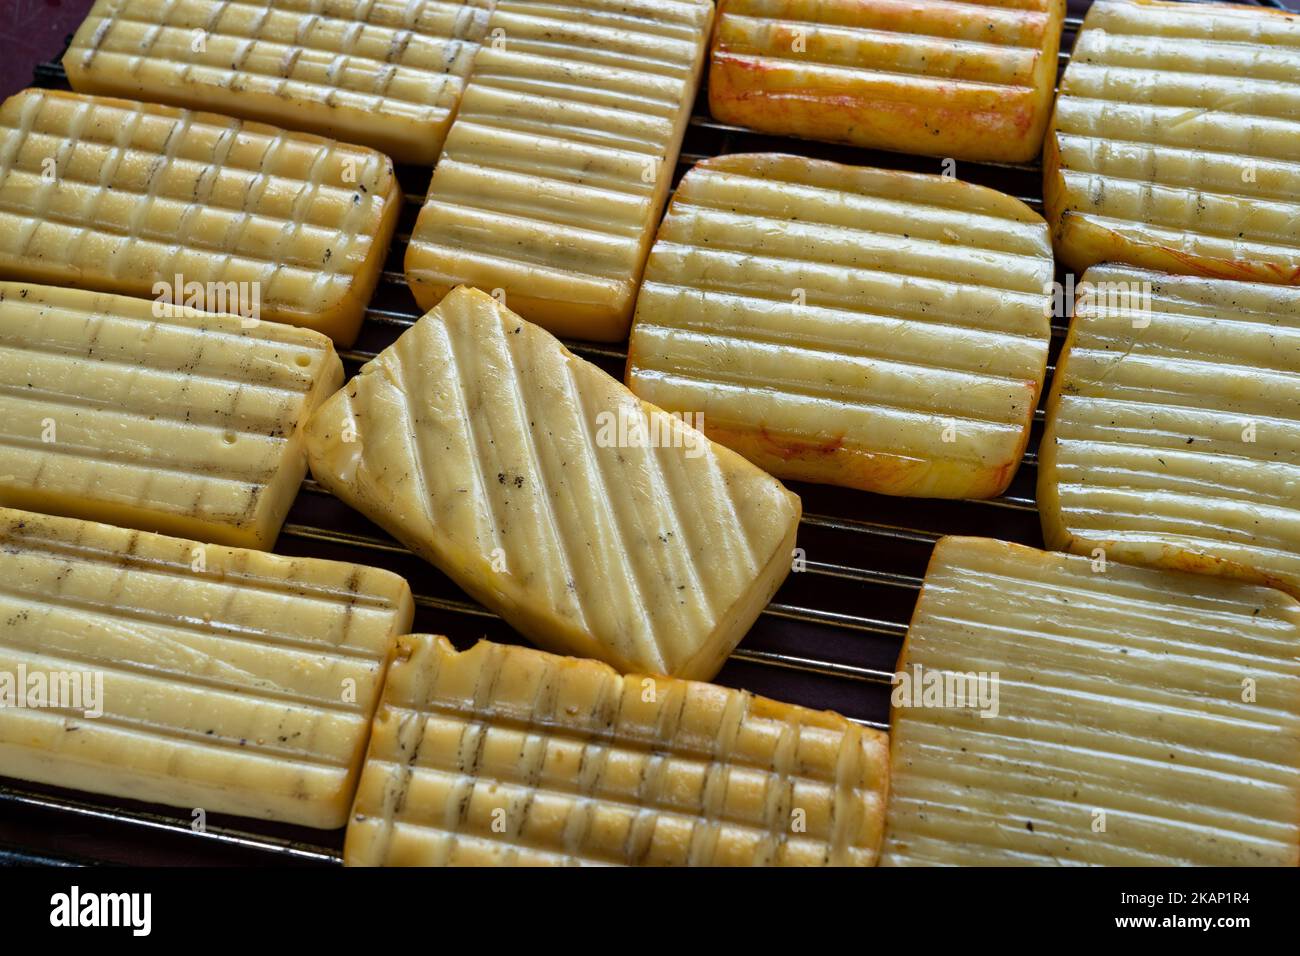 A closeup shot of Maroilles cheese on a rack Stock Photo